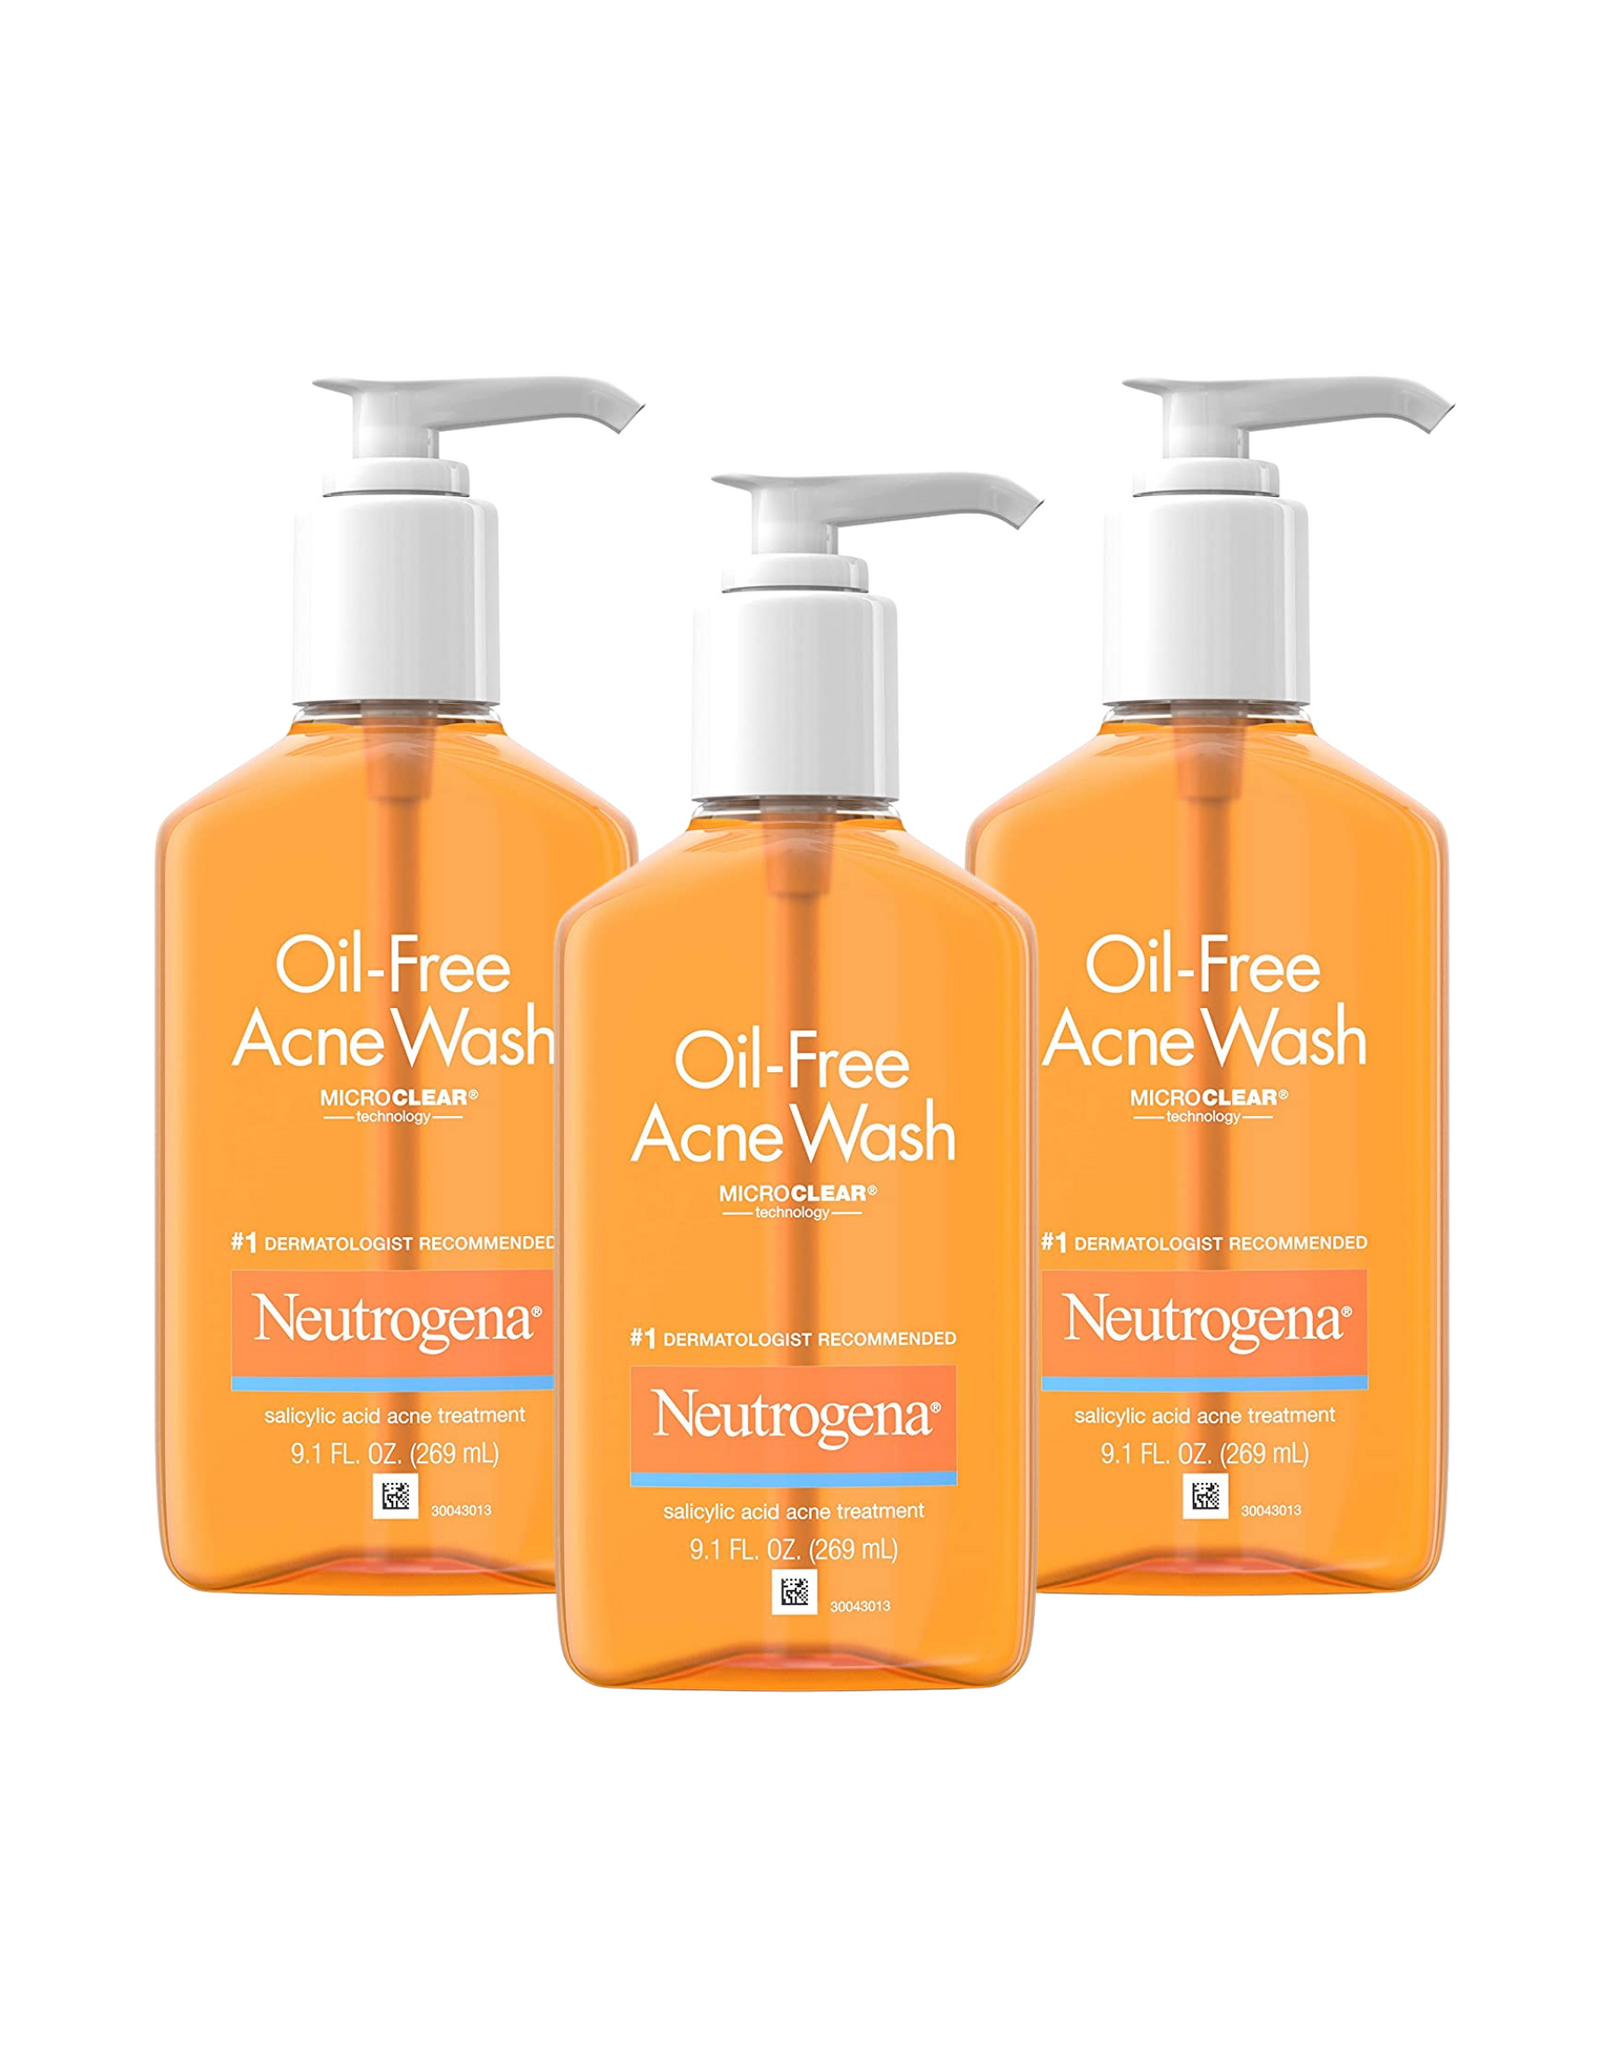 Neutrogena Oil-Free Acne Fighting Facial Cleanser with Salicylic Acid Acne Treatment medicine,, Daily Oil Free Acne Face Wash for Acne-Prone Skin with Salicylic Acid Medicine, 9.1 fl. oz